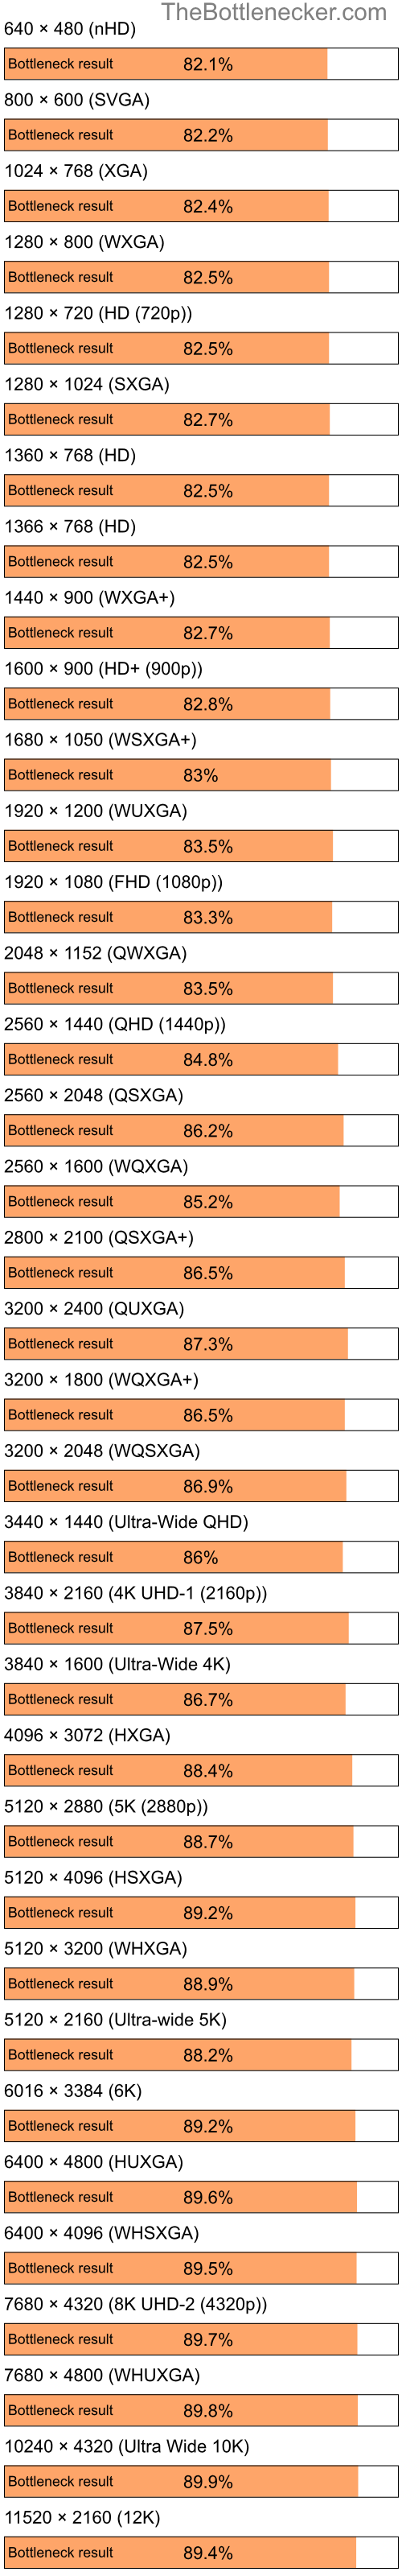 Bottleneck results by resolution for Intel Celeron and NVIDIA nForce 610i in Graphic Card Intense Tasks